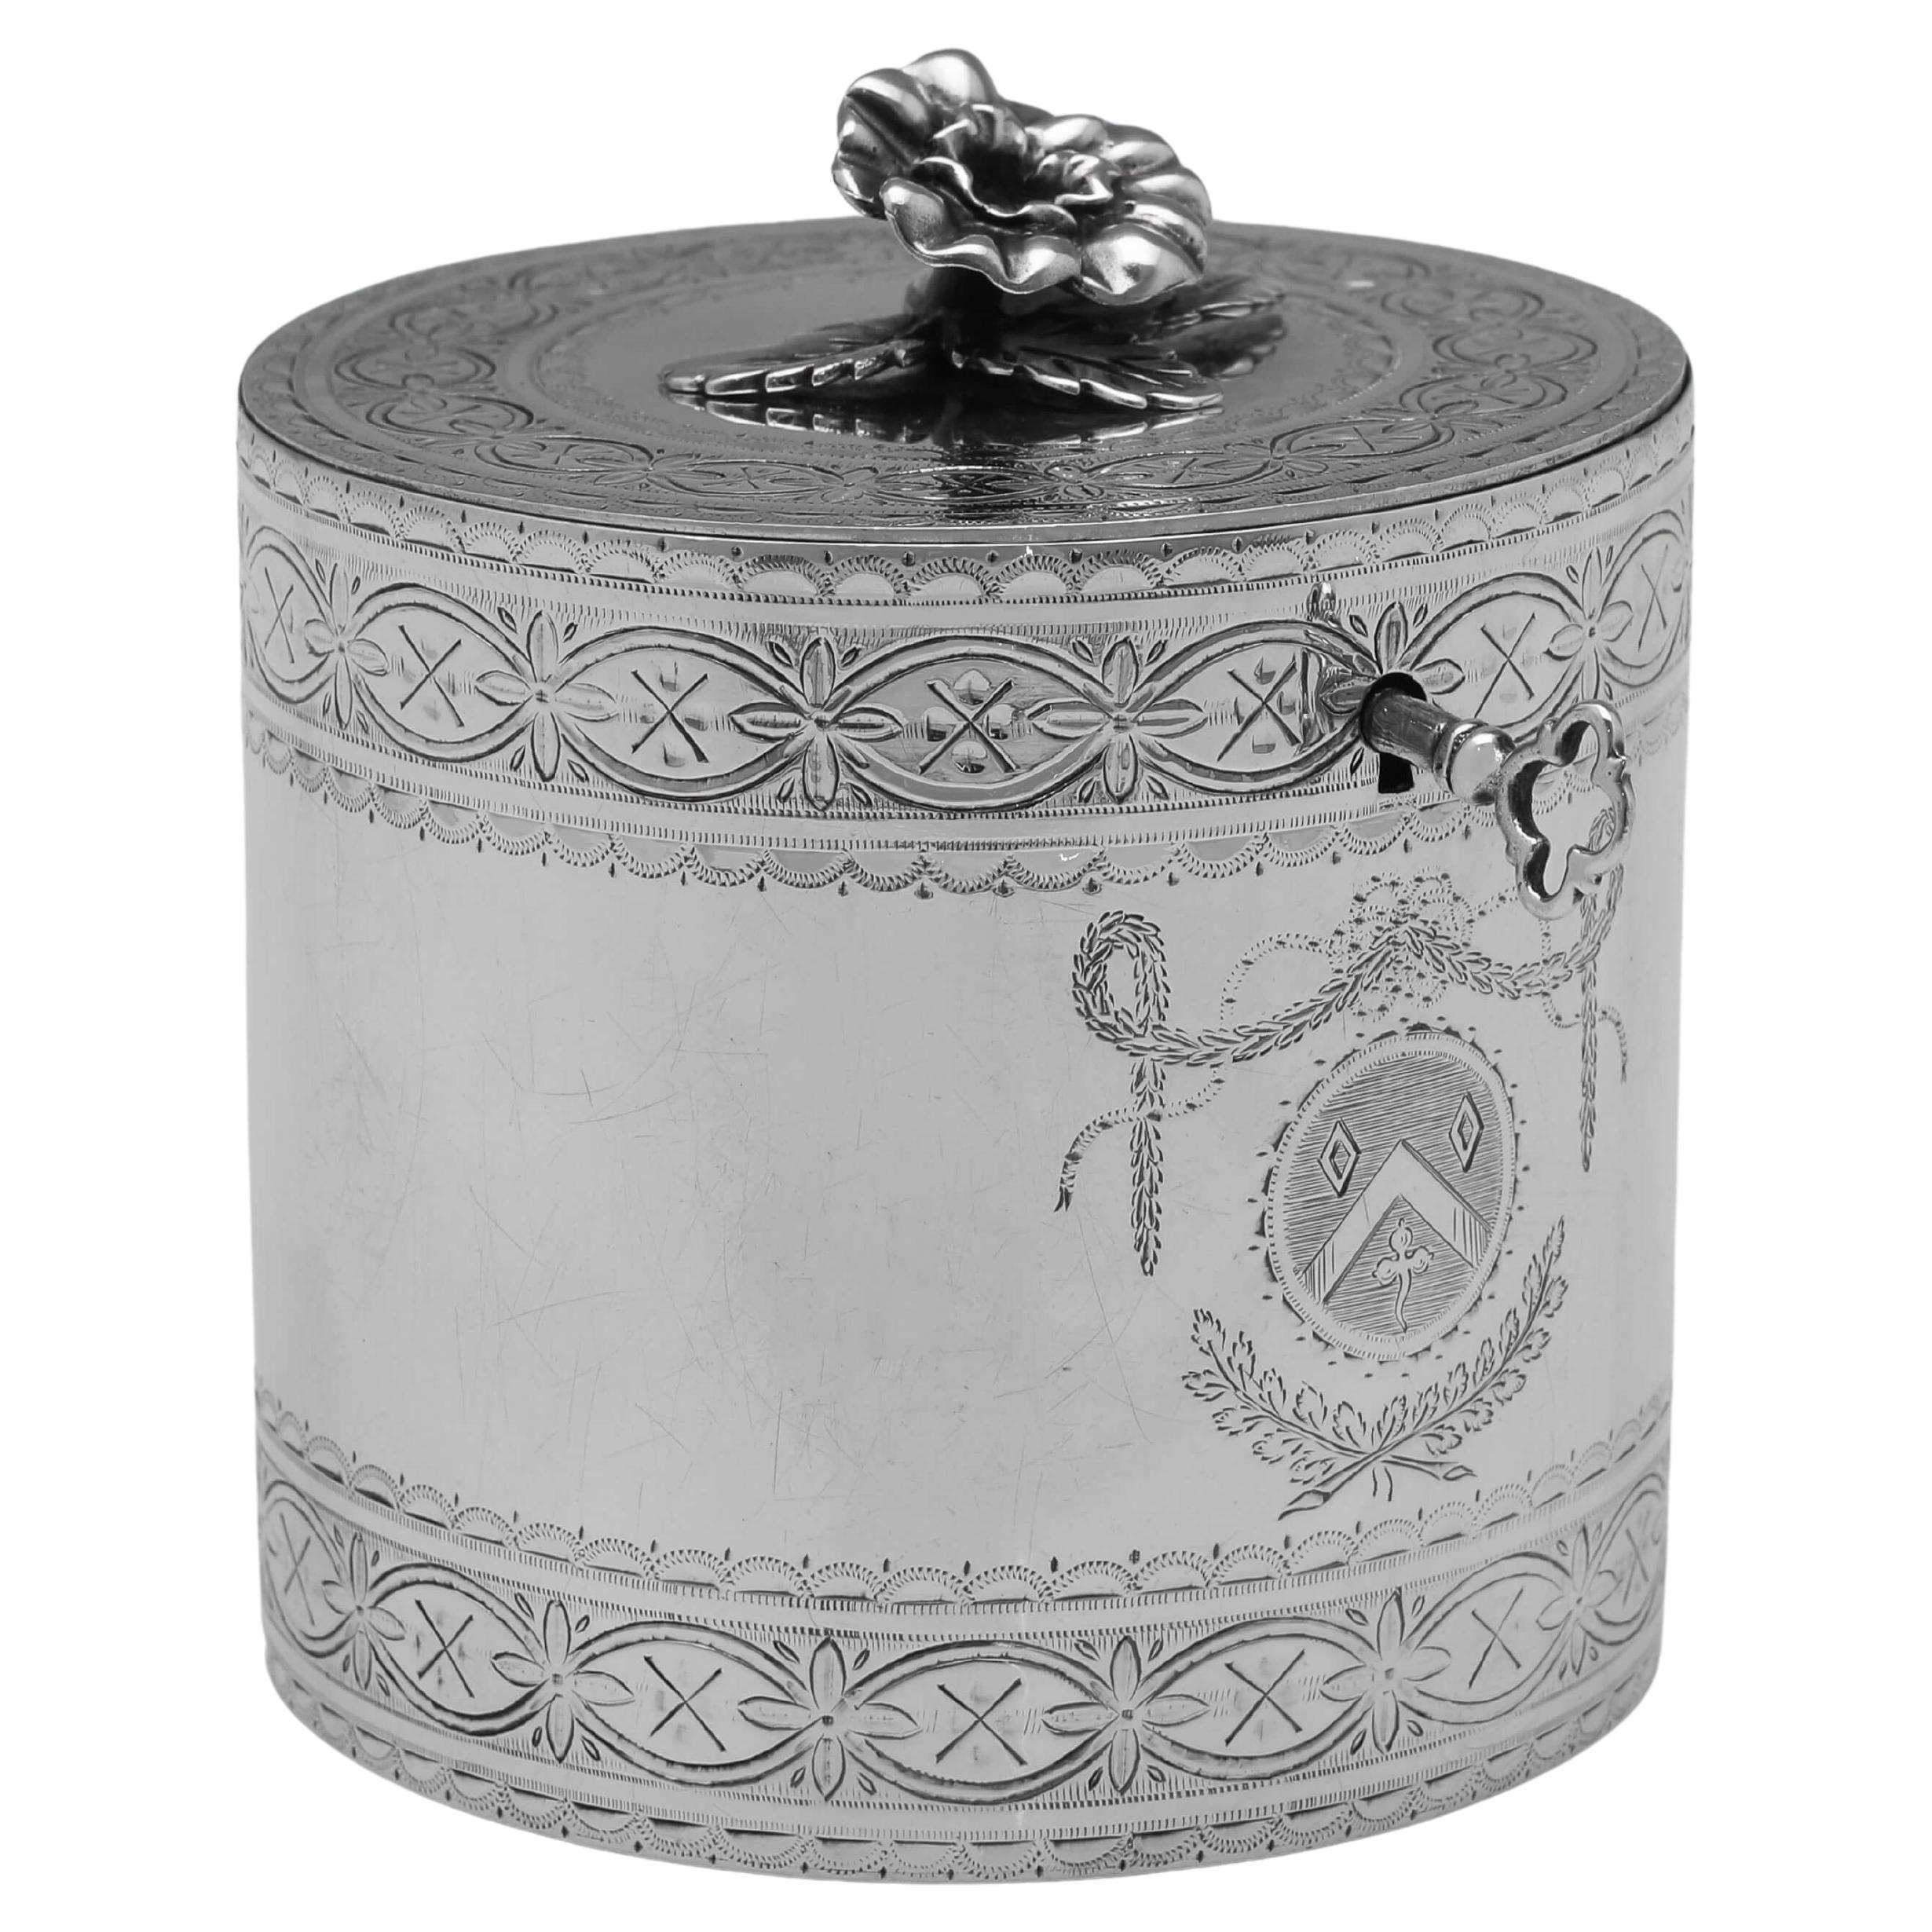 Neoclassical George III Period Antique Sterling Silver Tea Caddy - London 1775 For Sale